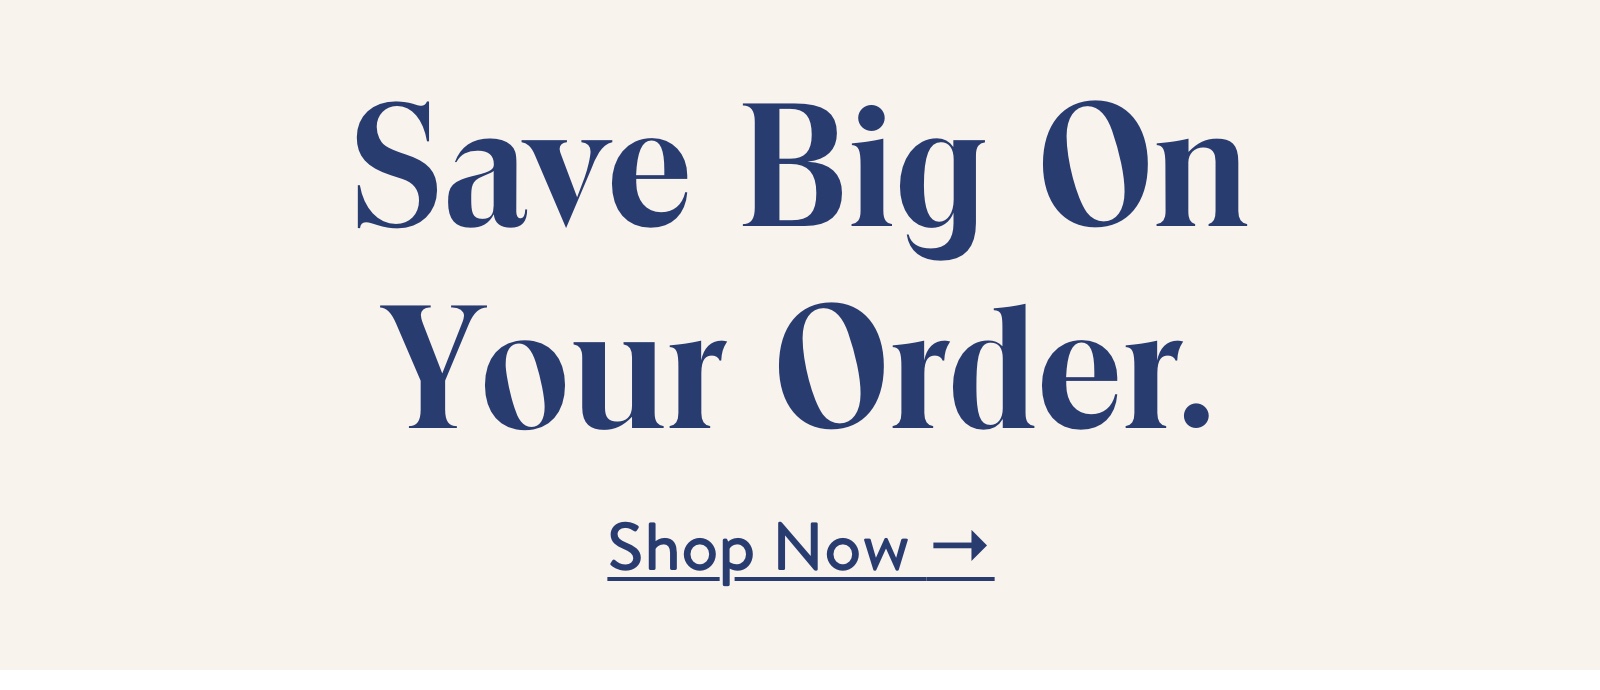 Save big on your order